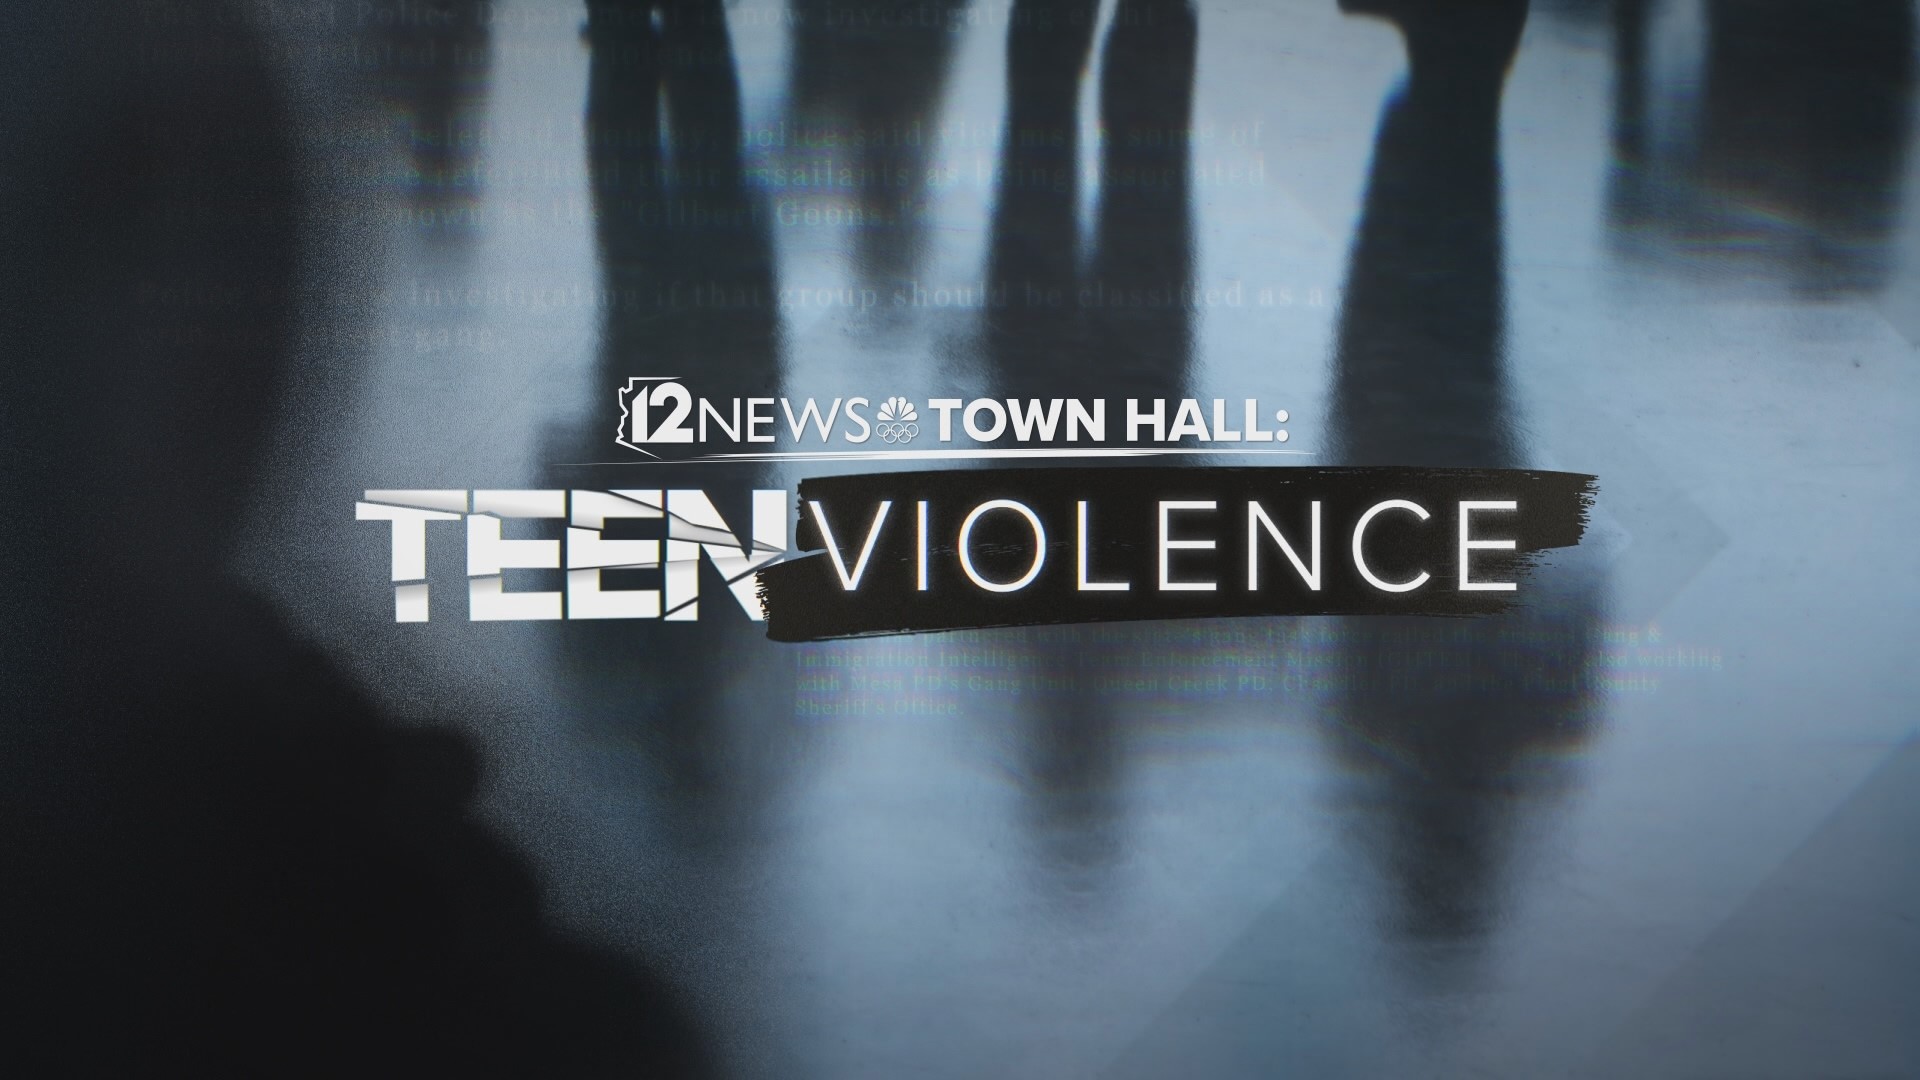 At the 12News Town Hall on Teen Violence in the East Valley, Mark Curtis & Caribe Devine talk to a panel of experts about the root causes